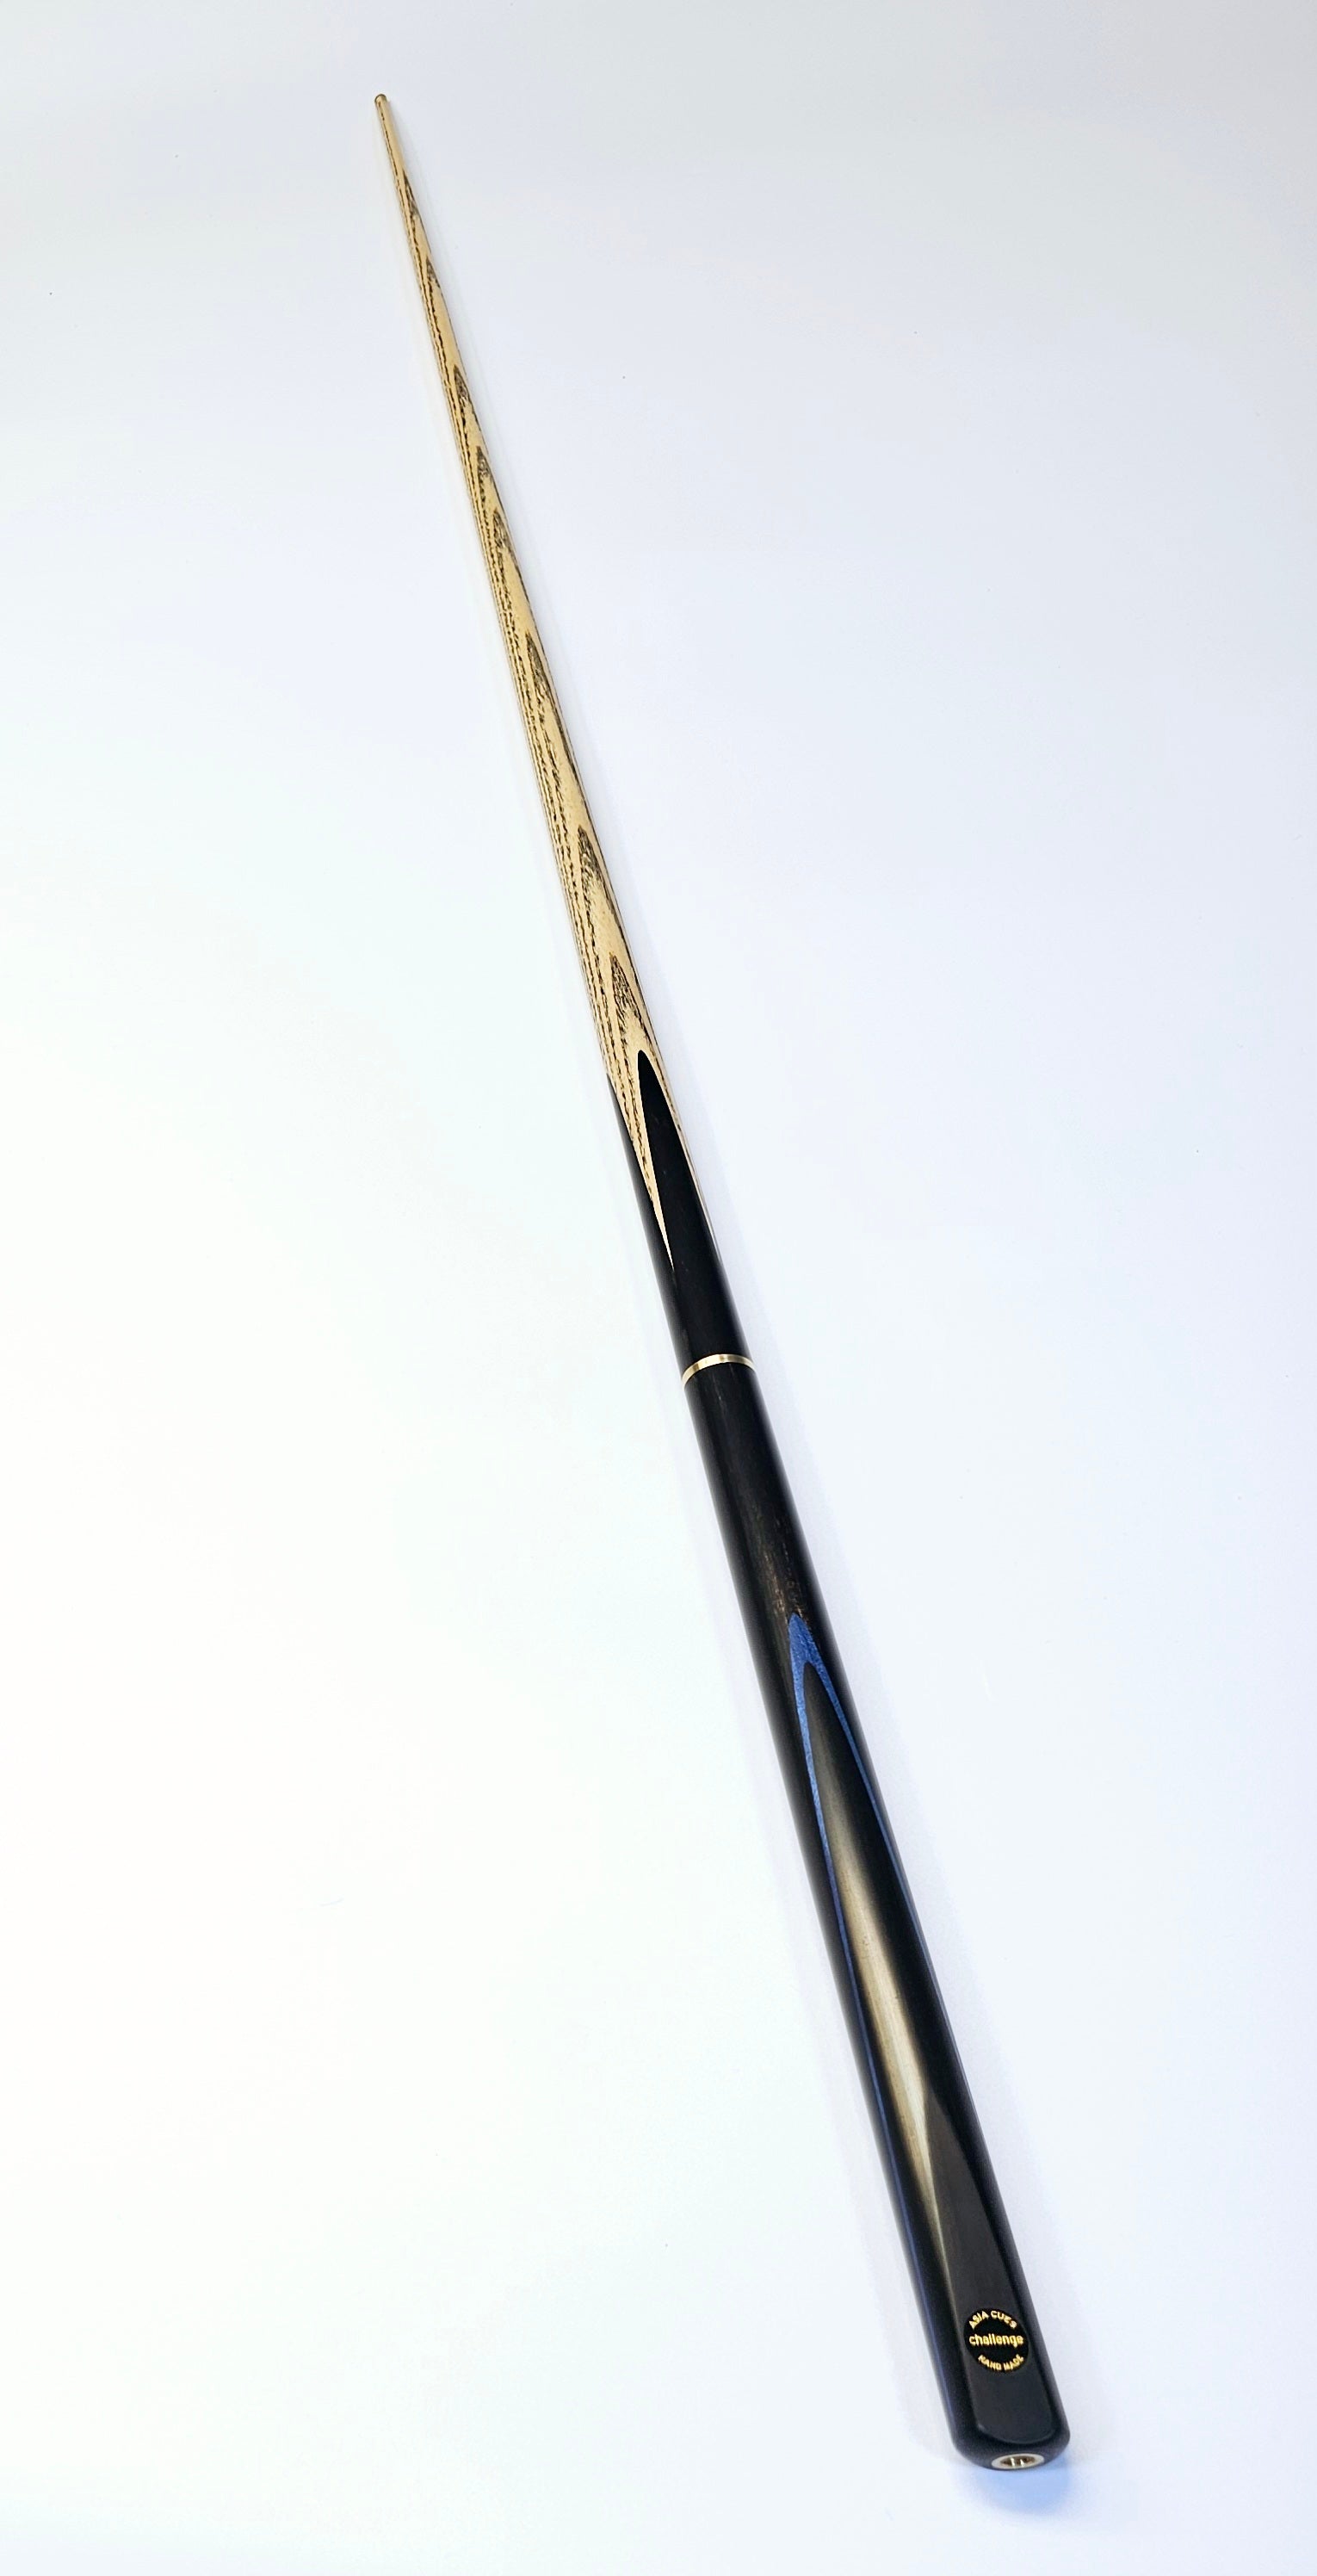 Asia Cues Challenge - 3/4 Jointed Pool Cue 8.7mm Tip, 18.1oz, 58"